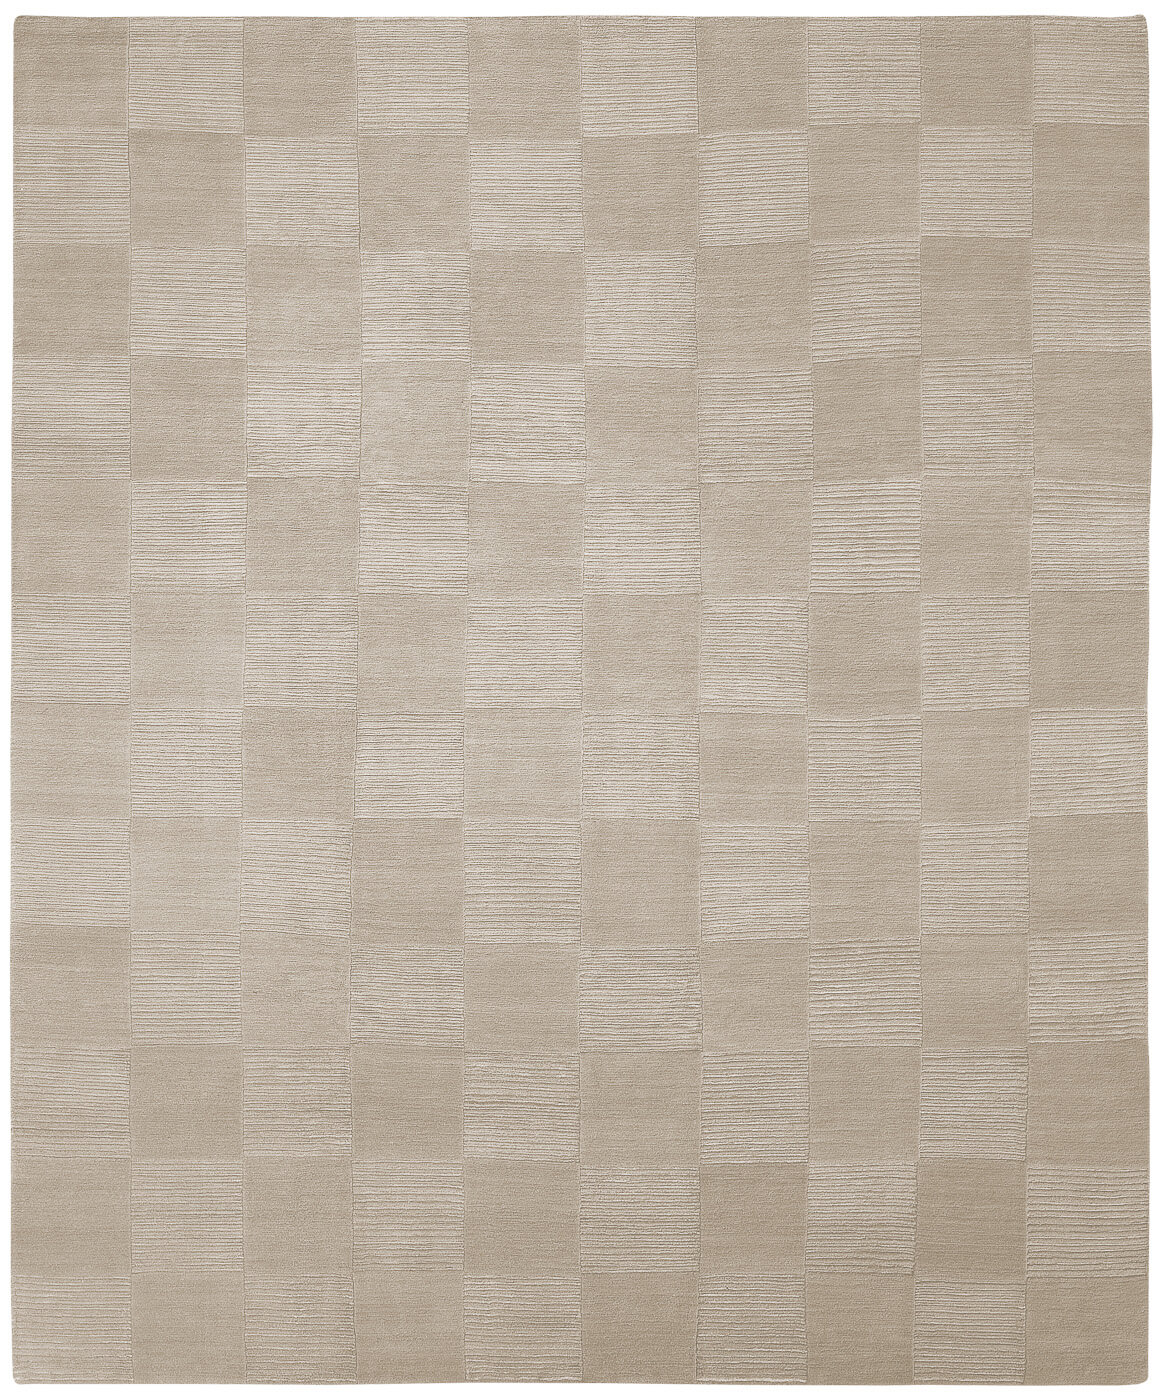 Boxes Hand-woven Luxury Rug ☞ Size: 200 x 300 cm